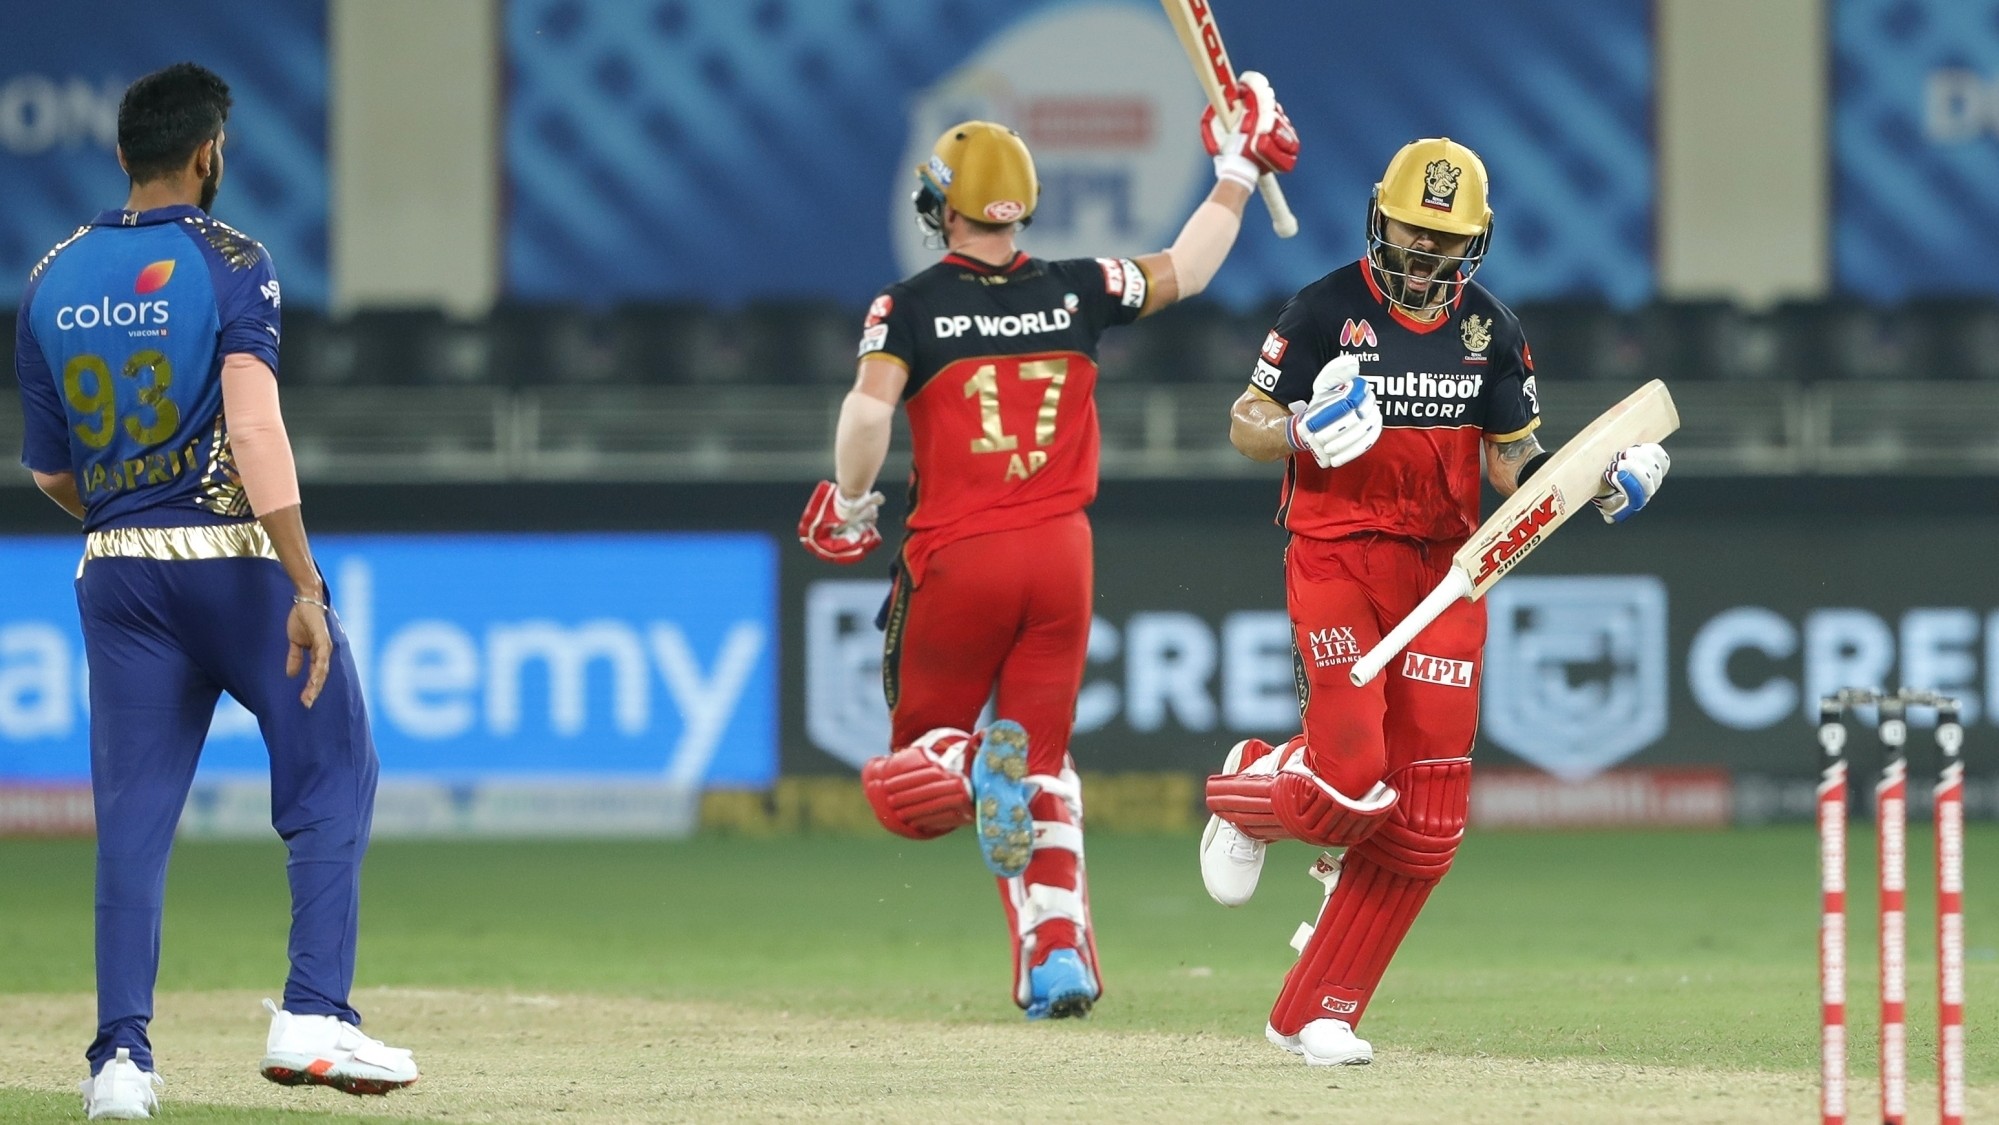 IPL 2020: IPL creates new viewership record; 269 million viewers watch the league in opening week